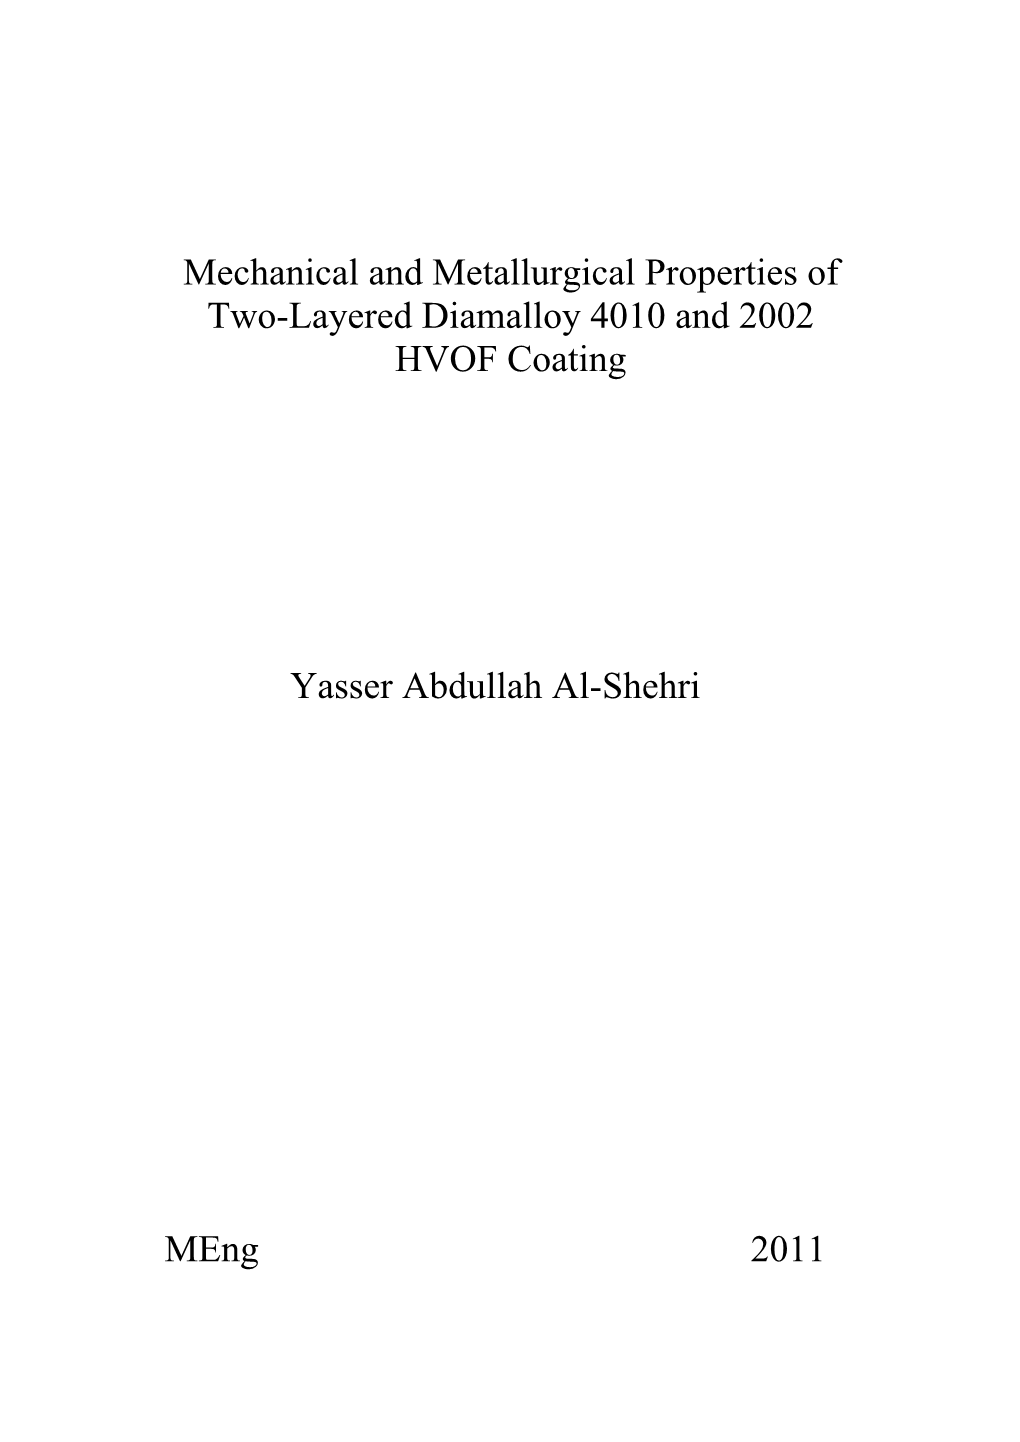 Mechanical and Metallurgical Properties of Two-Layered Diamalloy 4010 and 2002 HVOF Coating